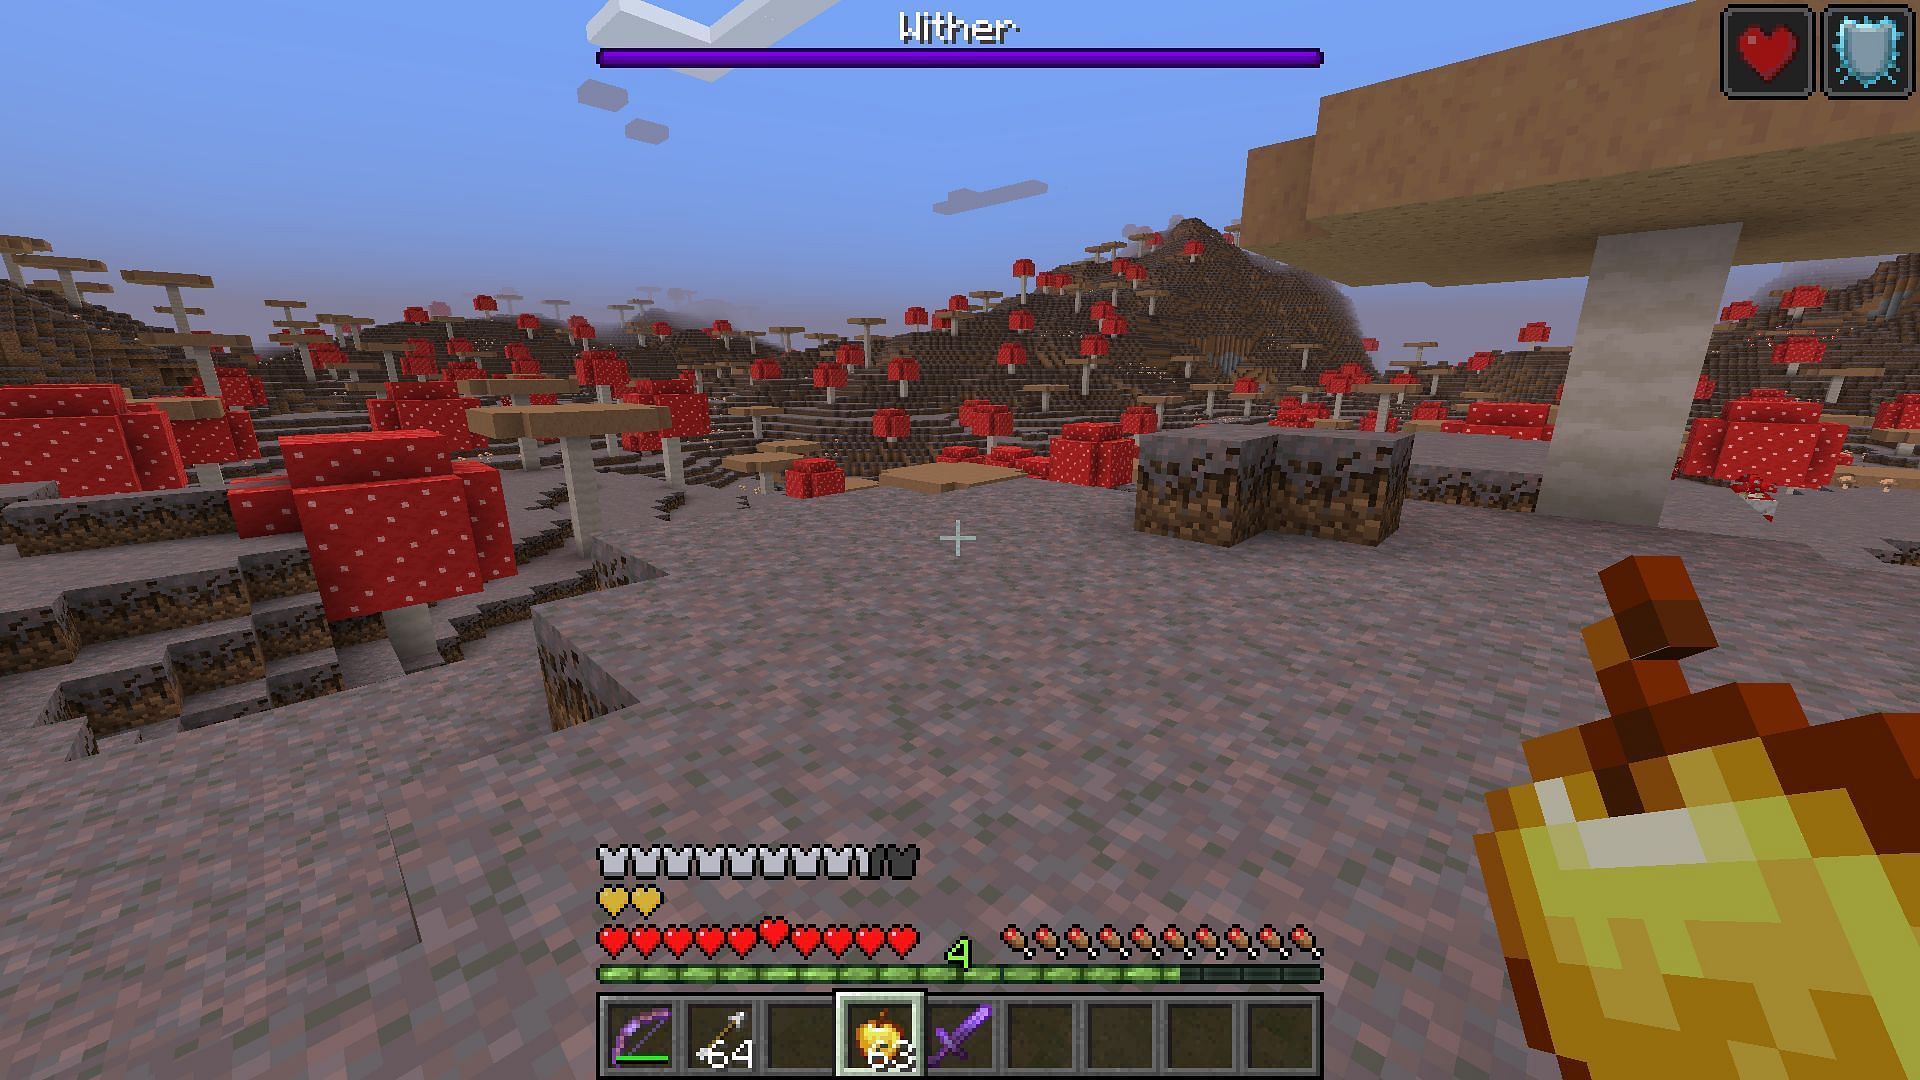 Golden apples will help players a lot during the fight with the Wither in Minecraft (Image via Mojang)